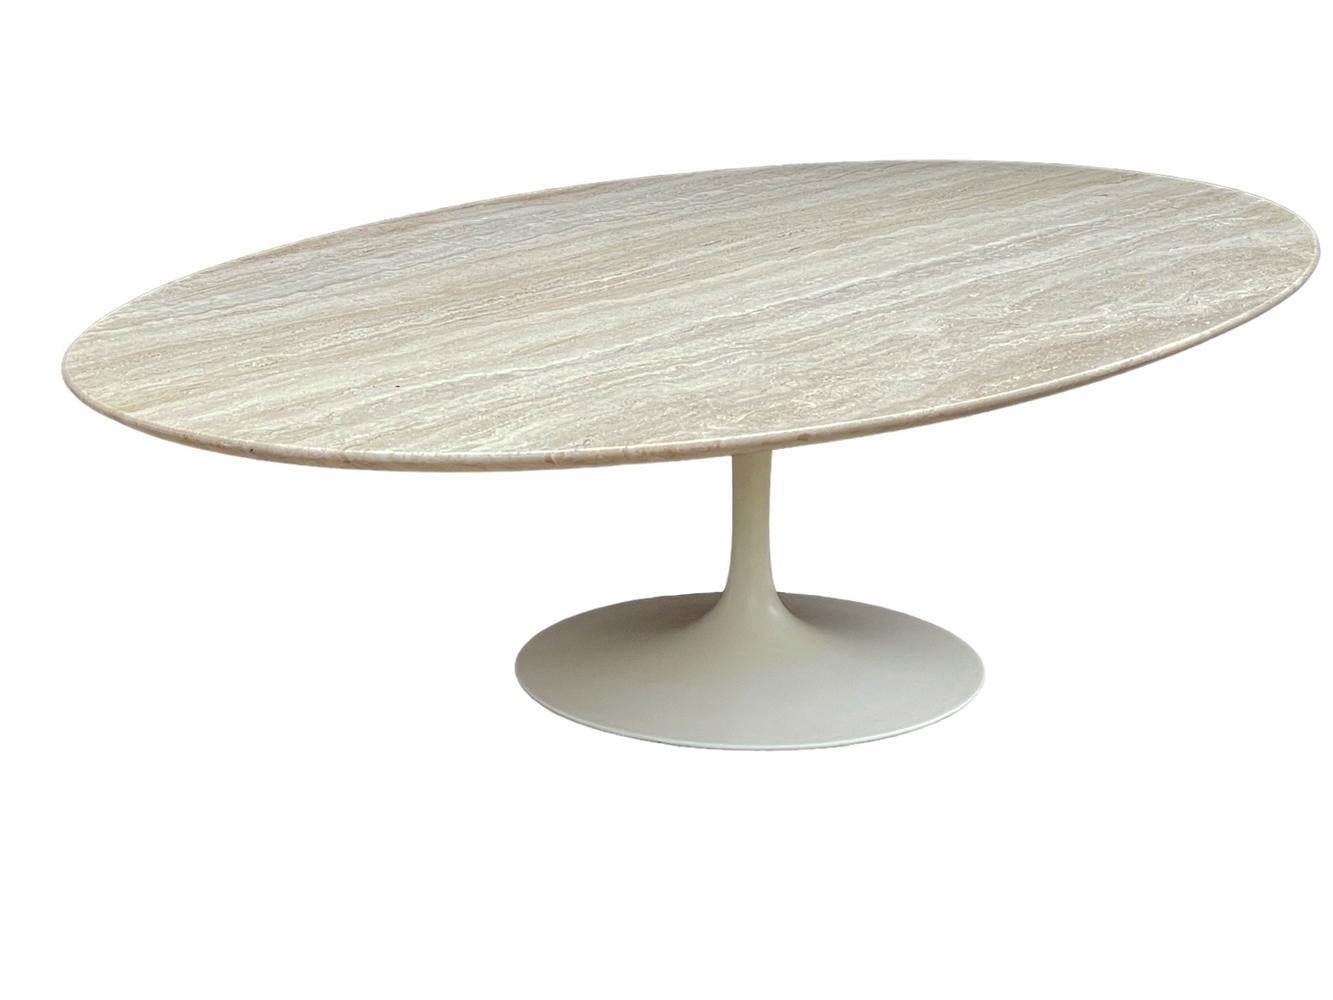 Mid Century Modern Oval Travertine Marble Cocktail Table by Saarinen for Knoll  In Good Condition For Sale In Philadelphia, PA